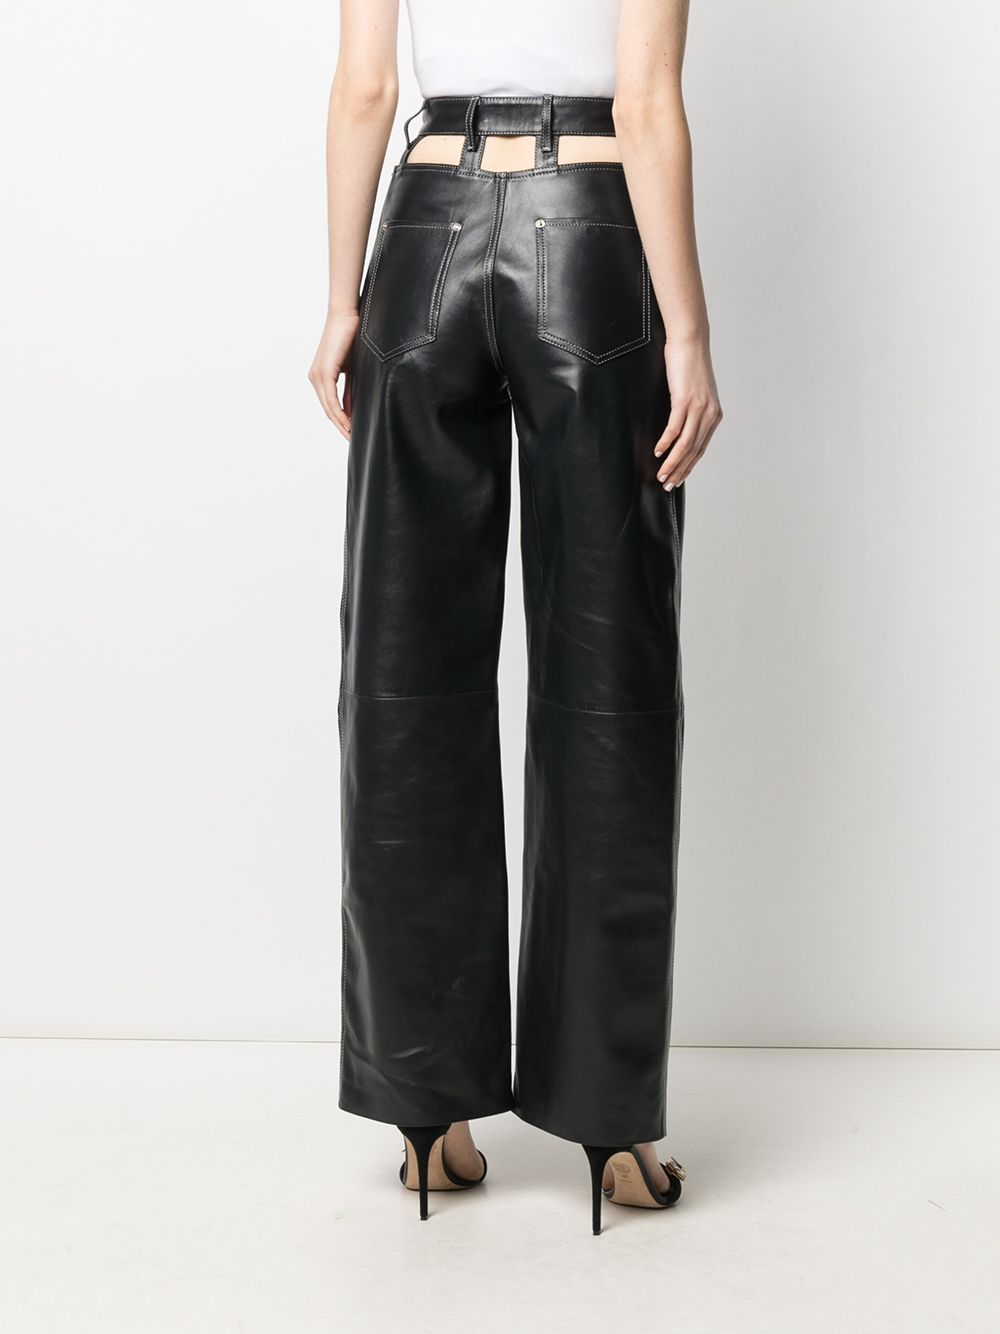 Manokhi cut-out Leather Trousers - Farfetch